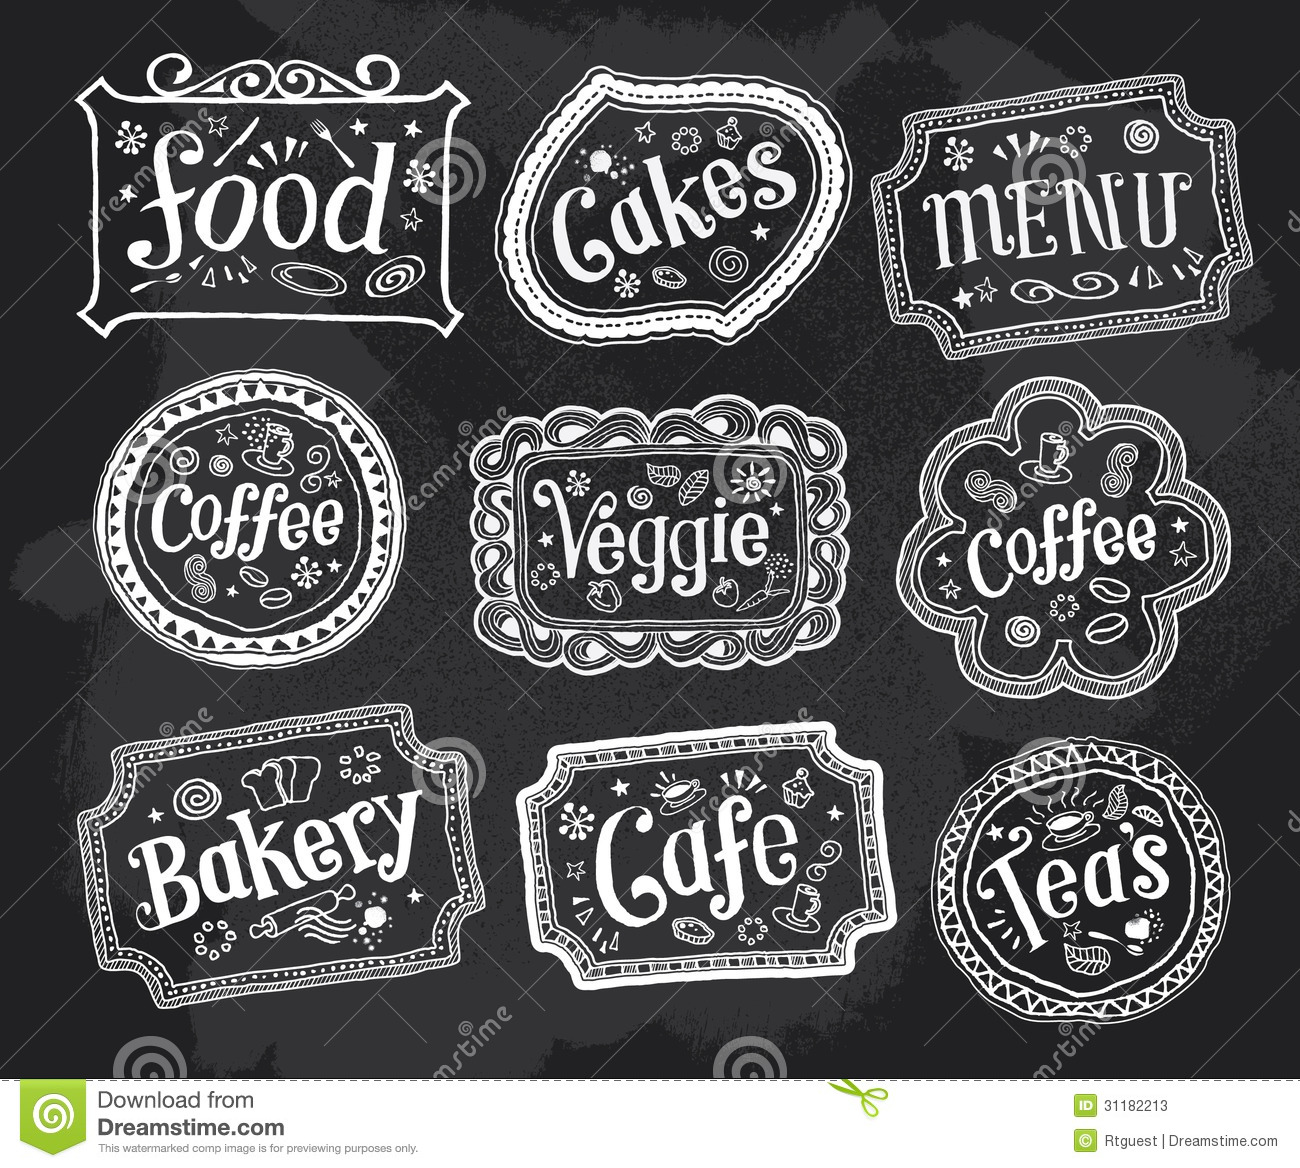      Frame Signs Hand Drawn Doodles Stock Photos   Image  31182213